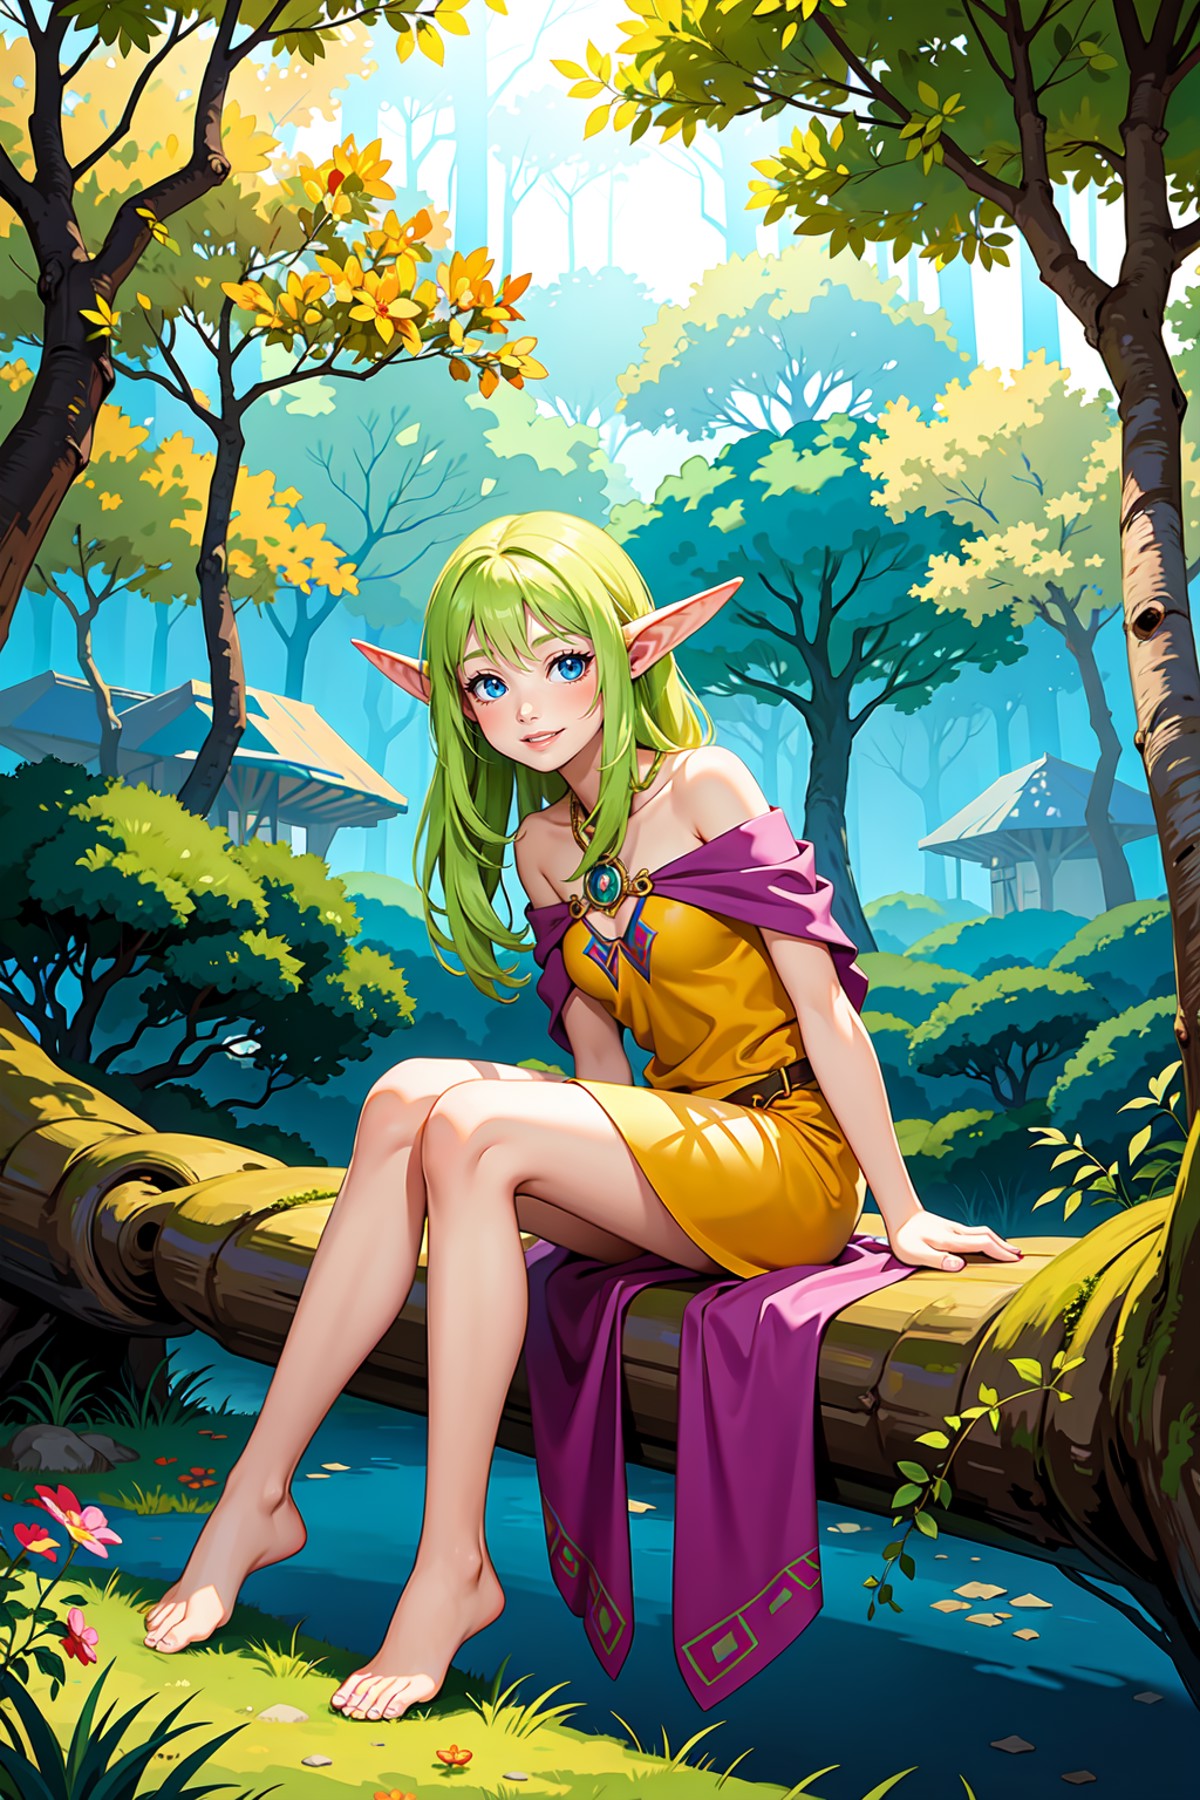 abstract environment, vivid colors, elegant fantasy, a shy elven maiden in a short summer dress, hiding in the forest, smi...